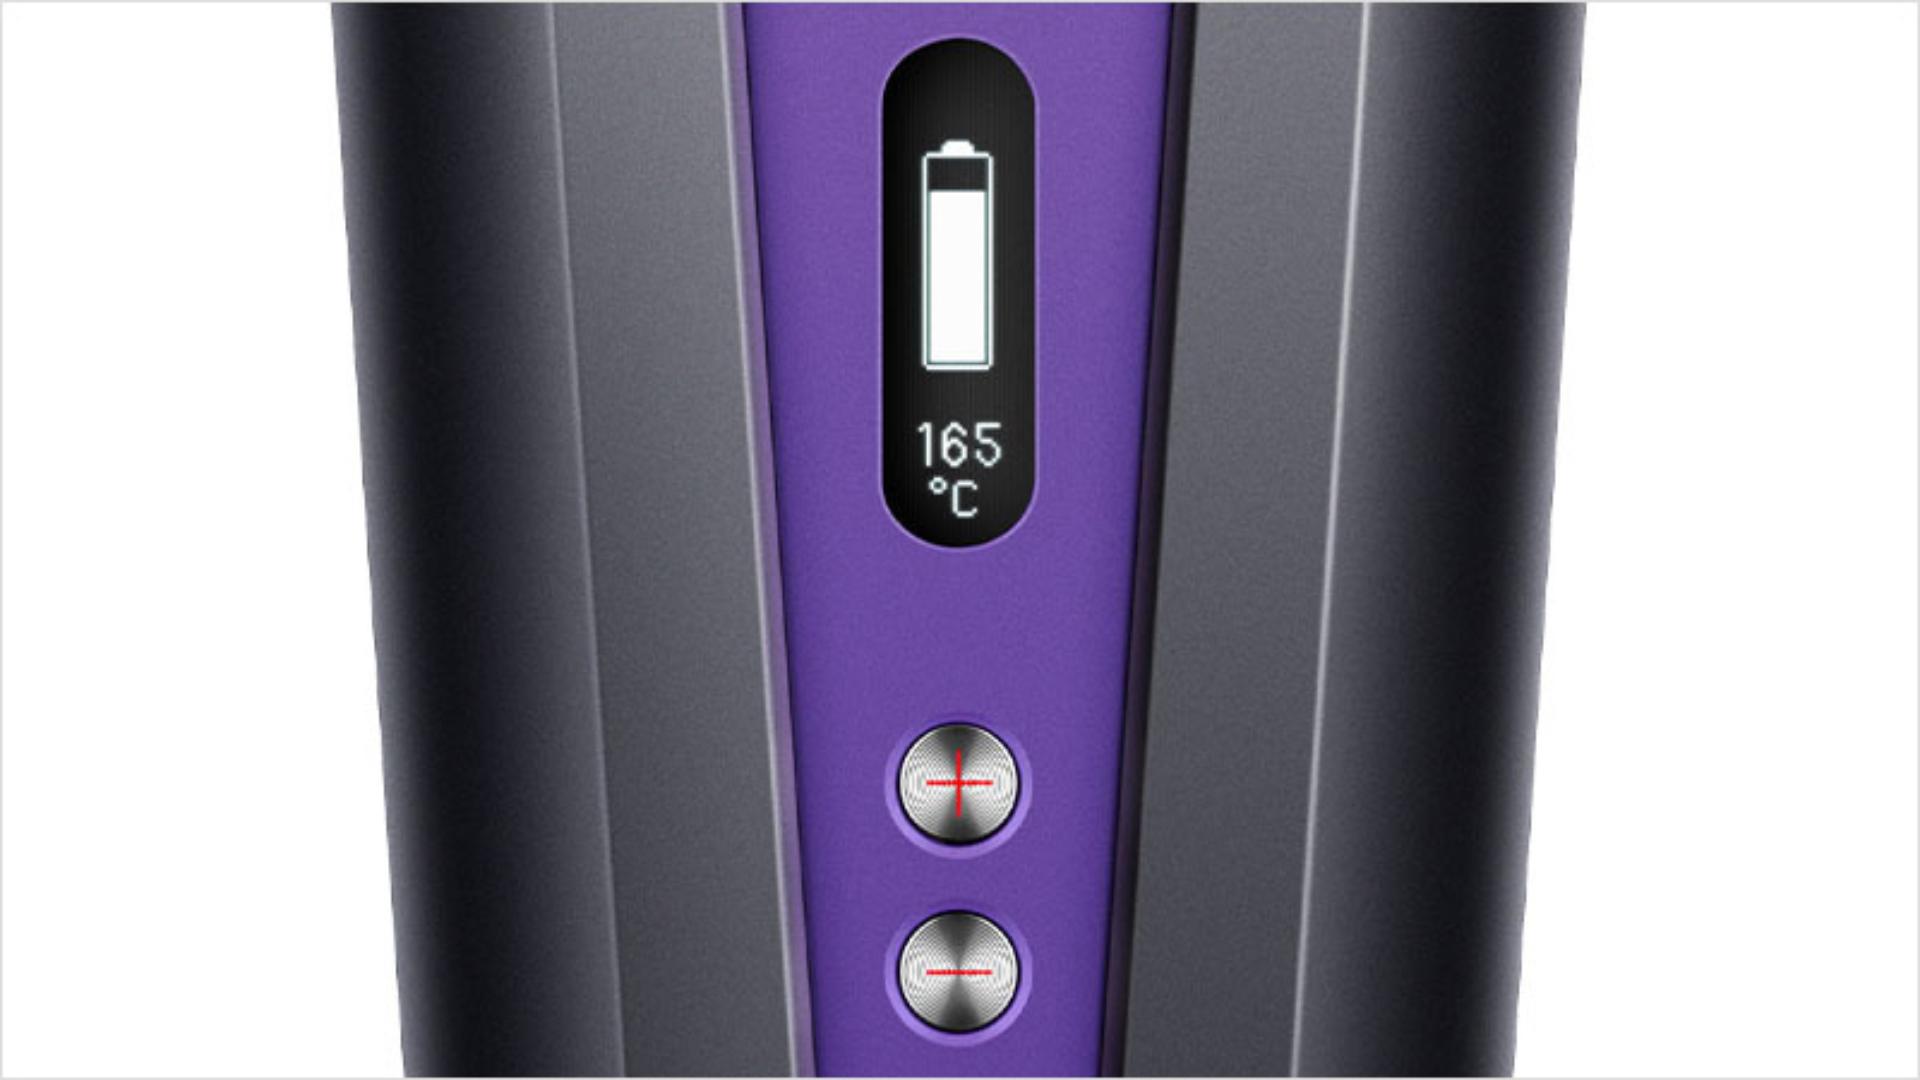 Close up of the OLED screen on the Dyson Corrale hair straightener